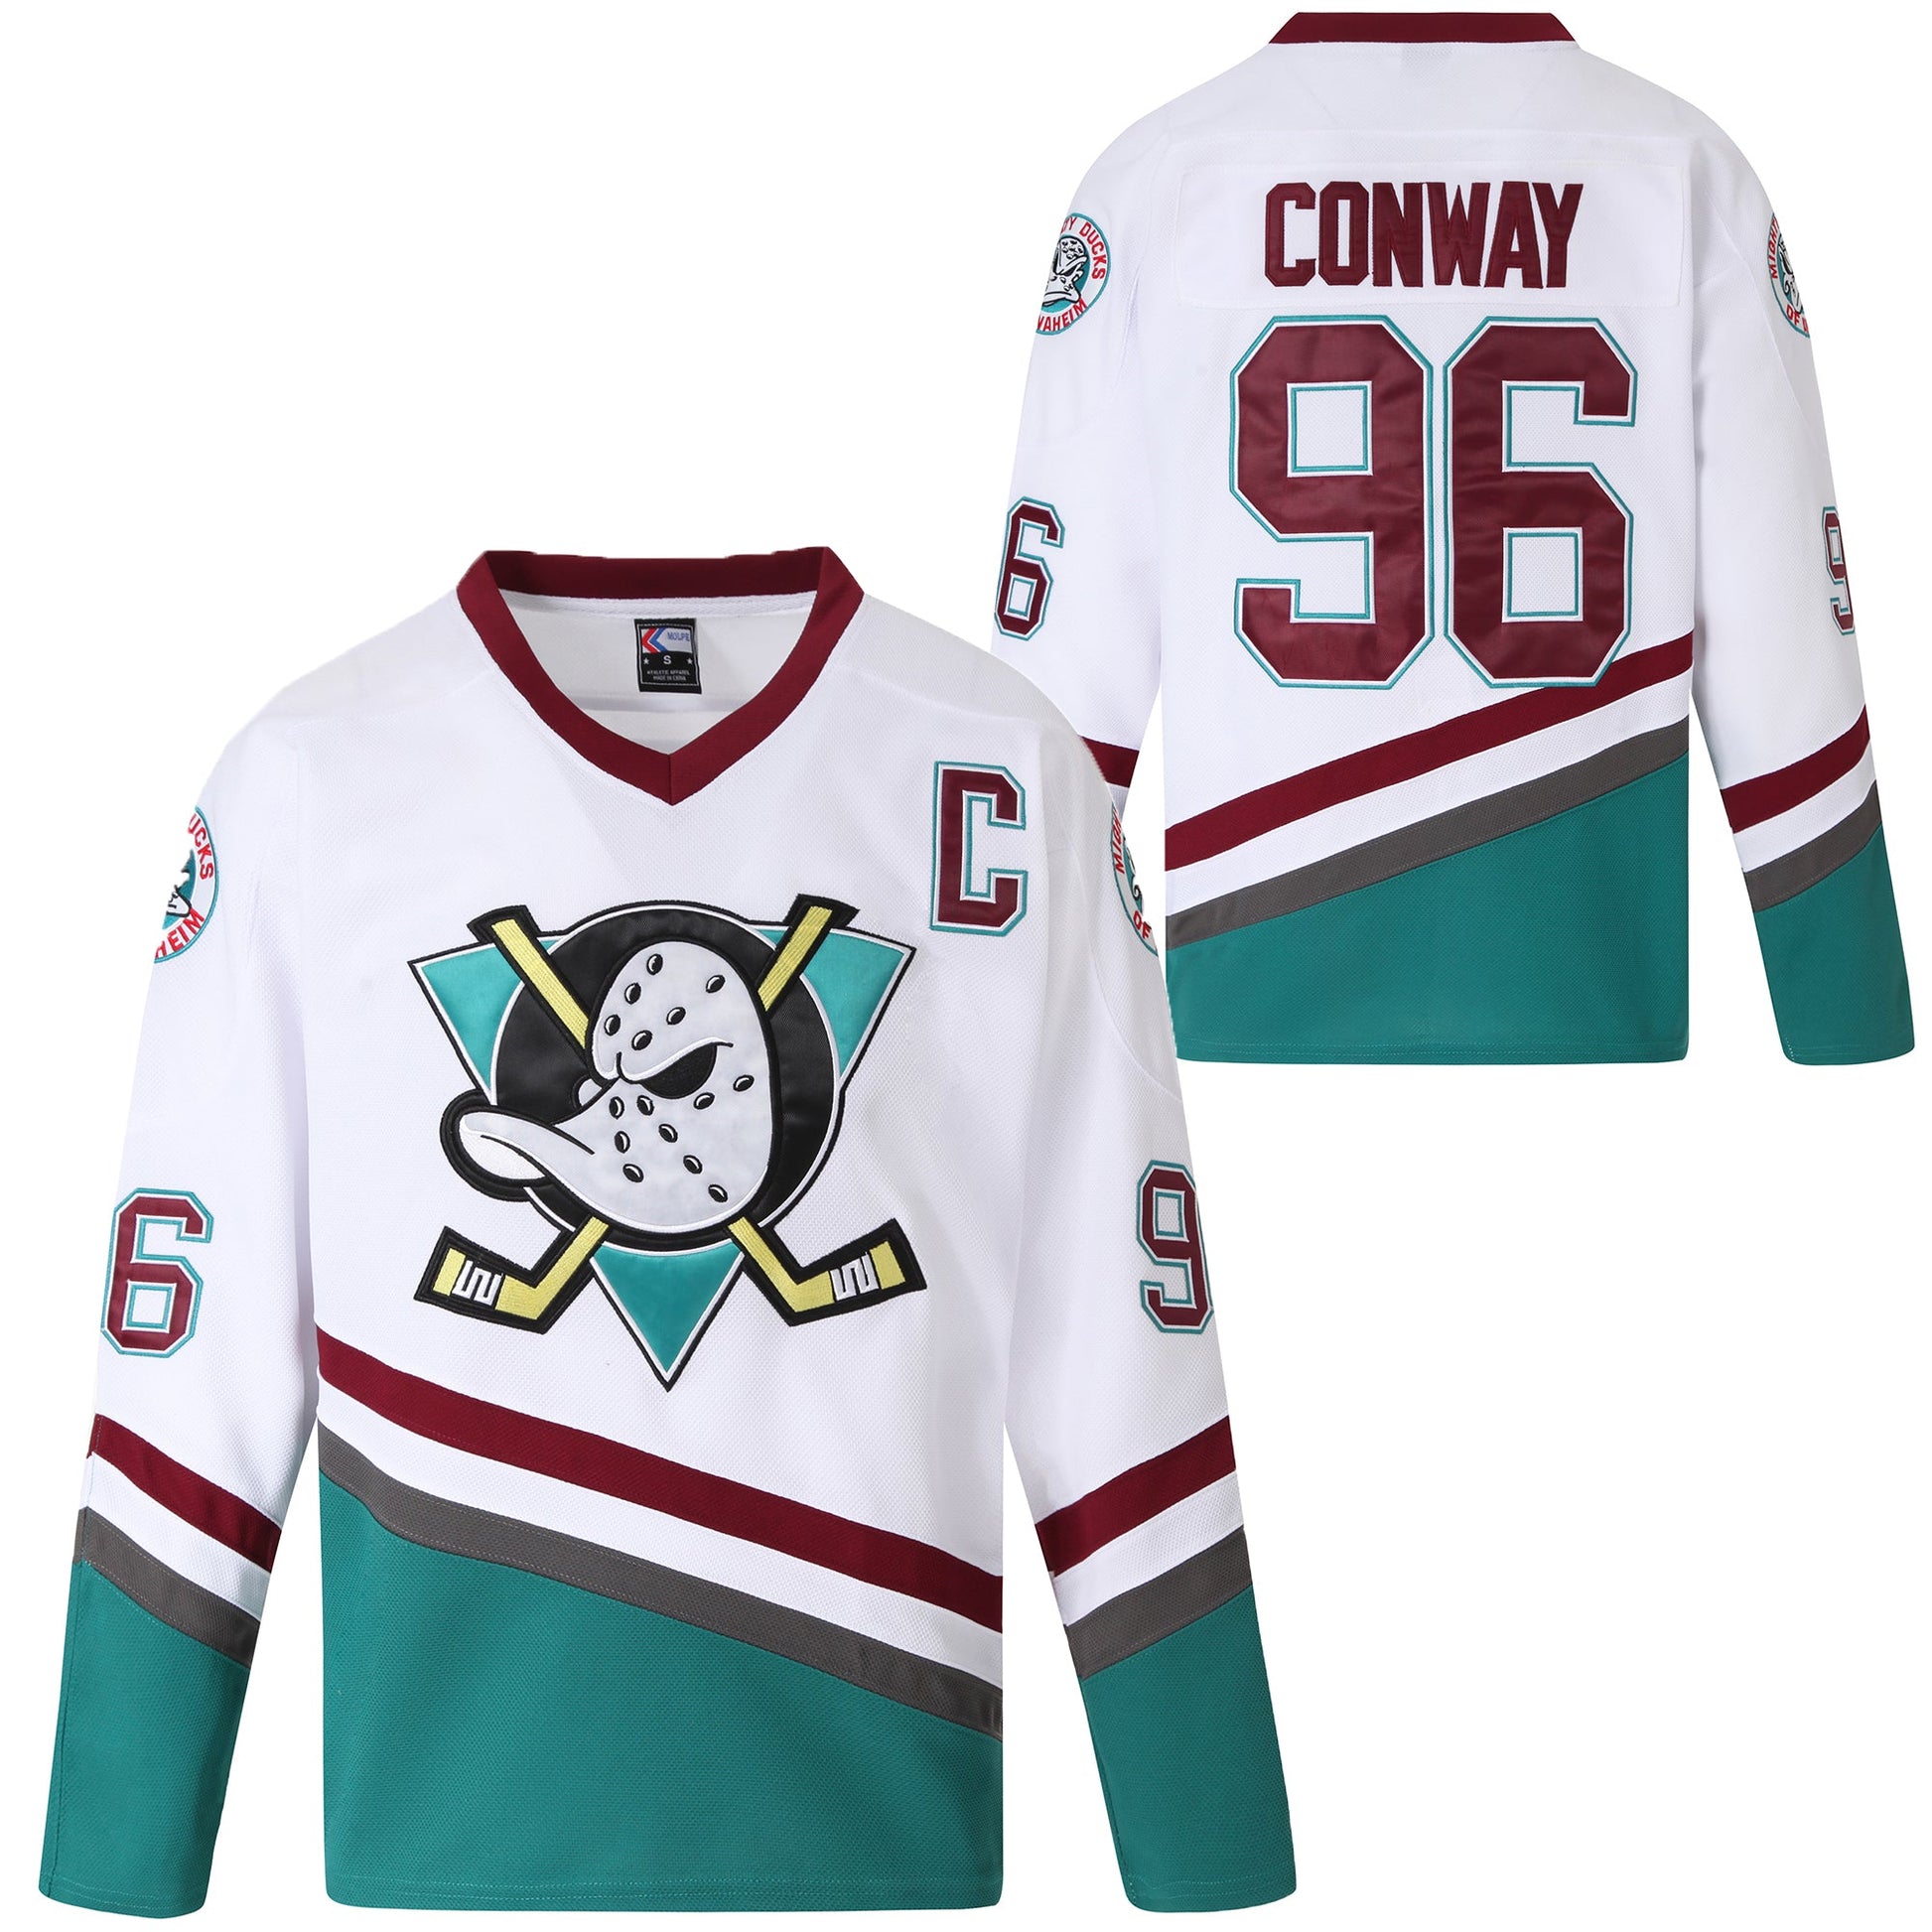 Youth Charlie Conway #96 Mighty Ducks Ice Hockey Jersey White freeshipping - Jersey One